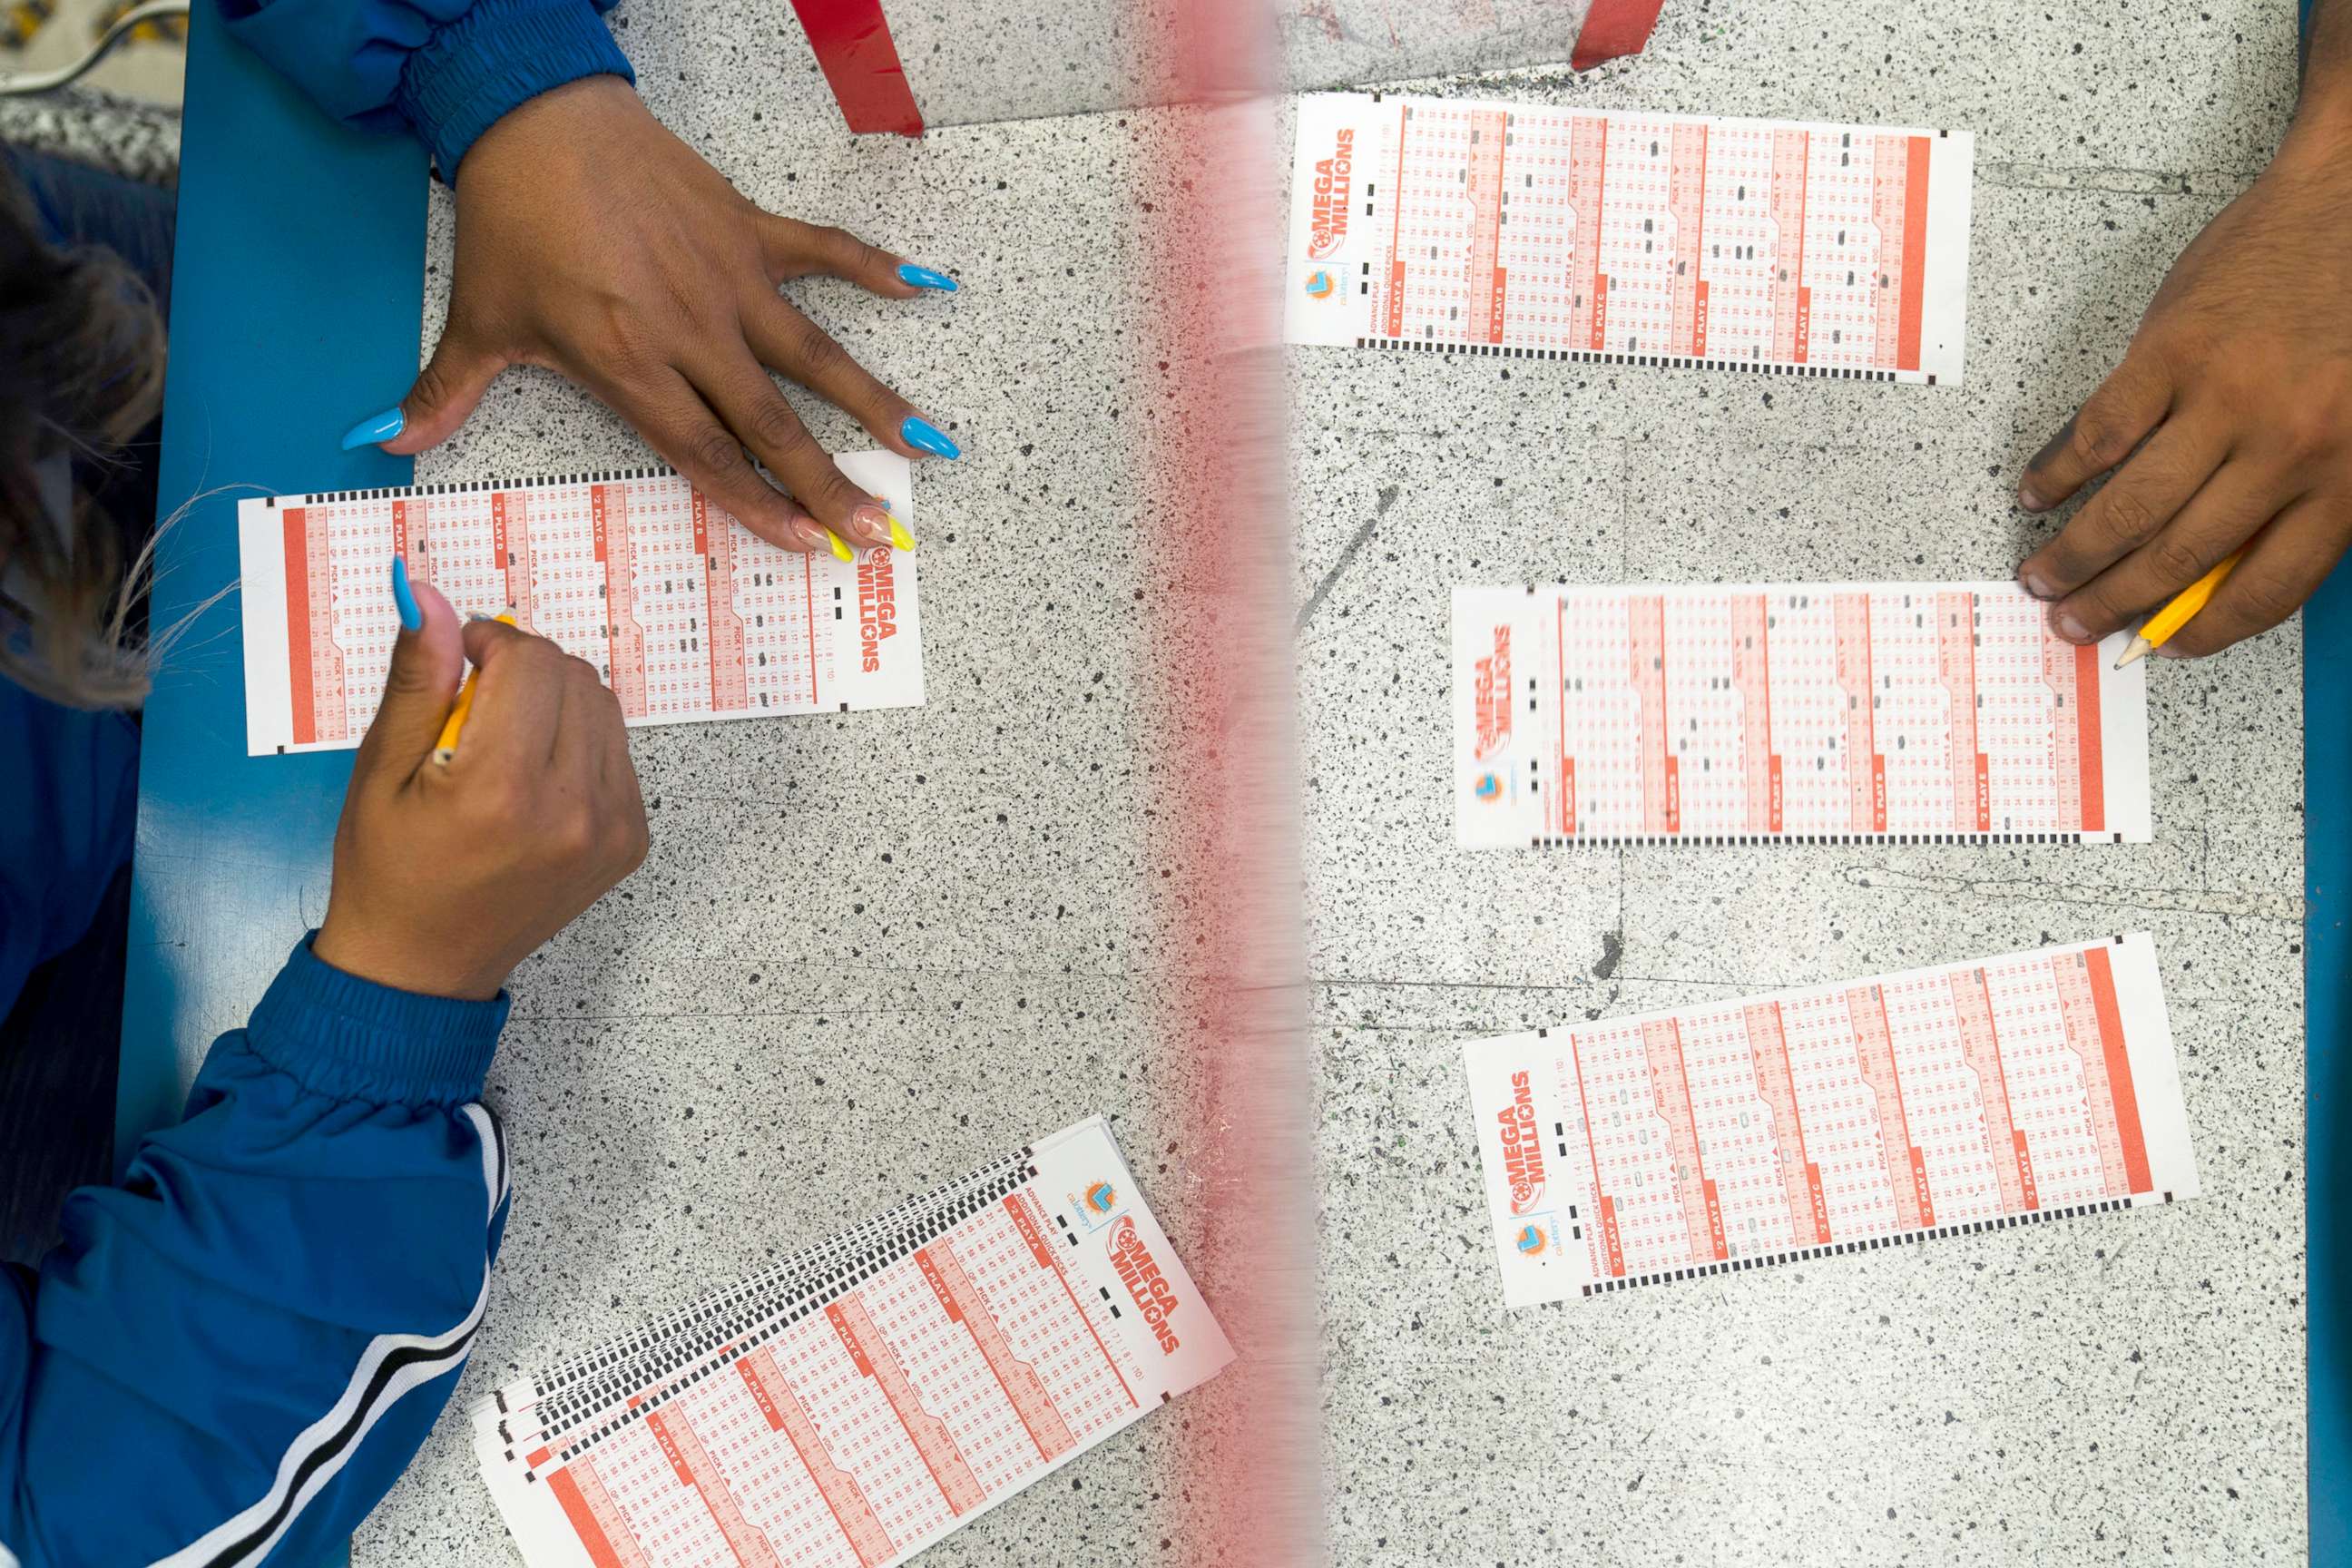 PHOTO: Nancy Linares, left, and Prince Joseph Israel fill out Mega Millions play slips at Blue Bird Liquor in Hawthorne, Calif., July 26, 2022.